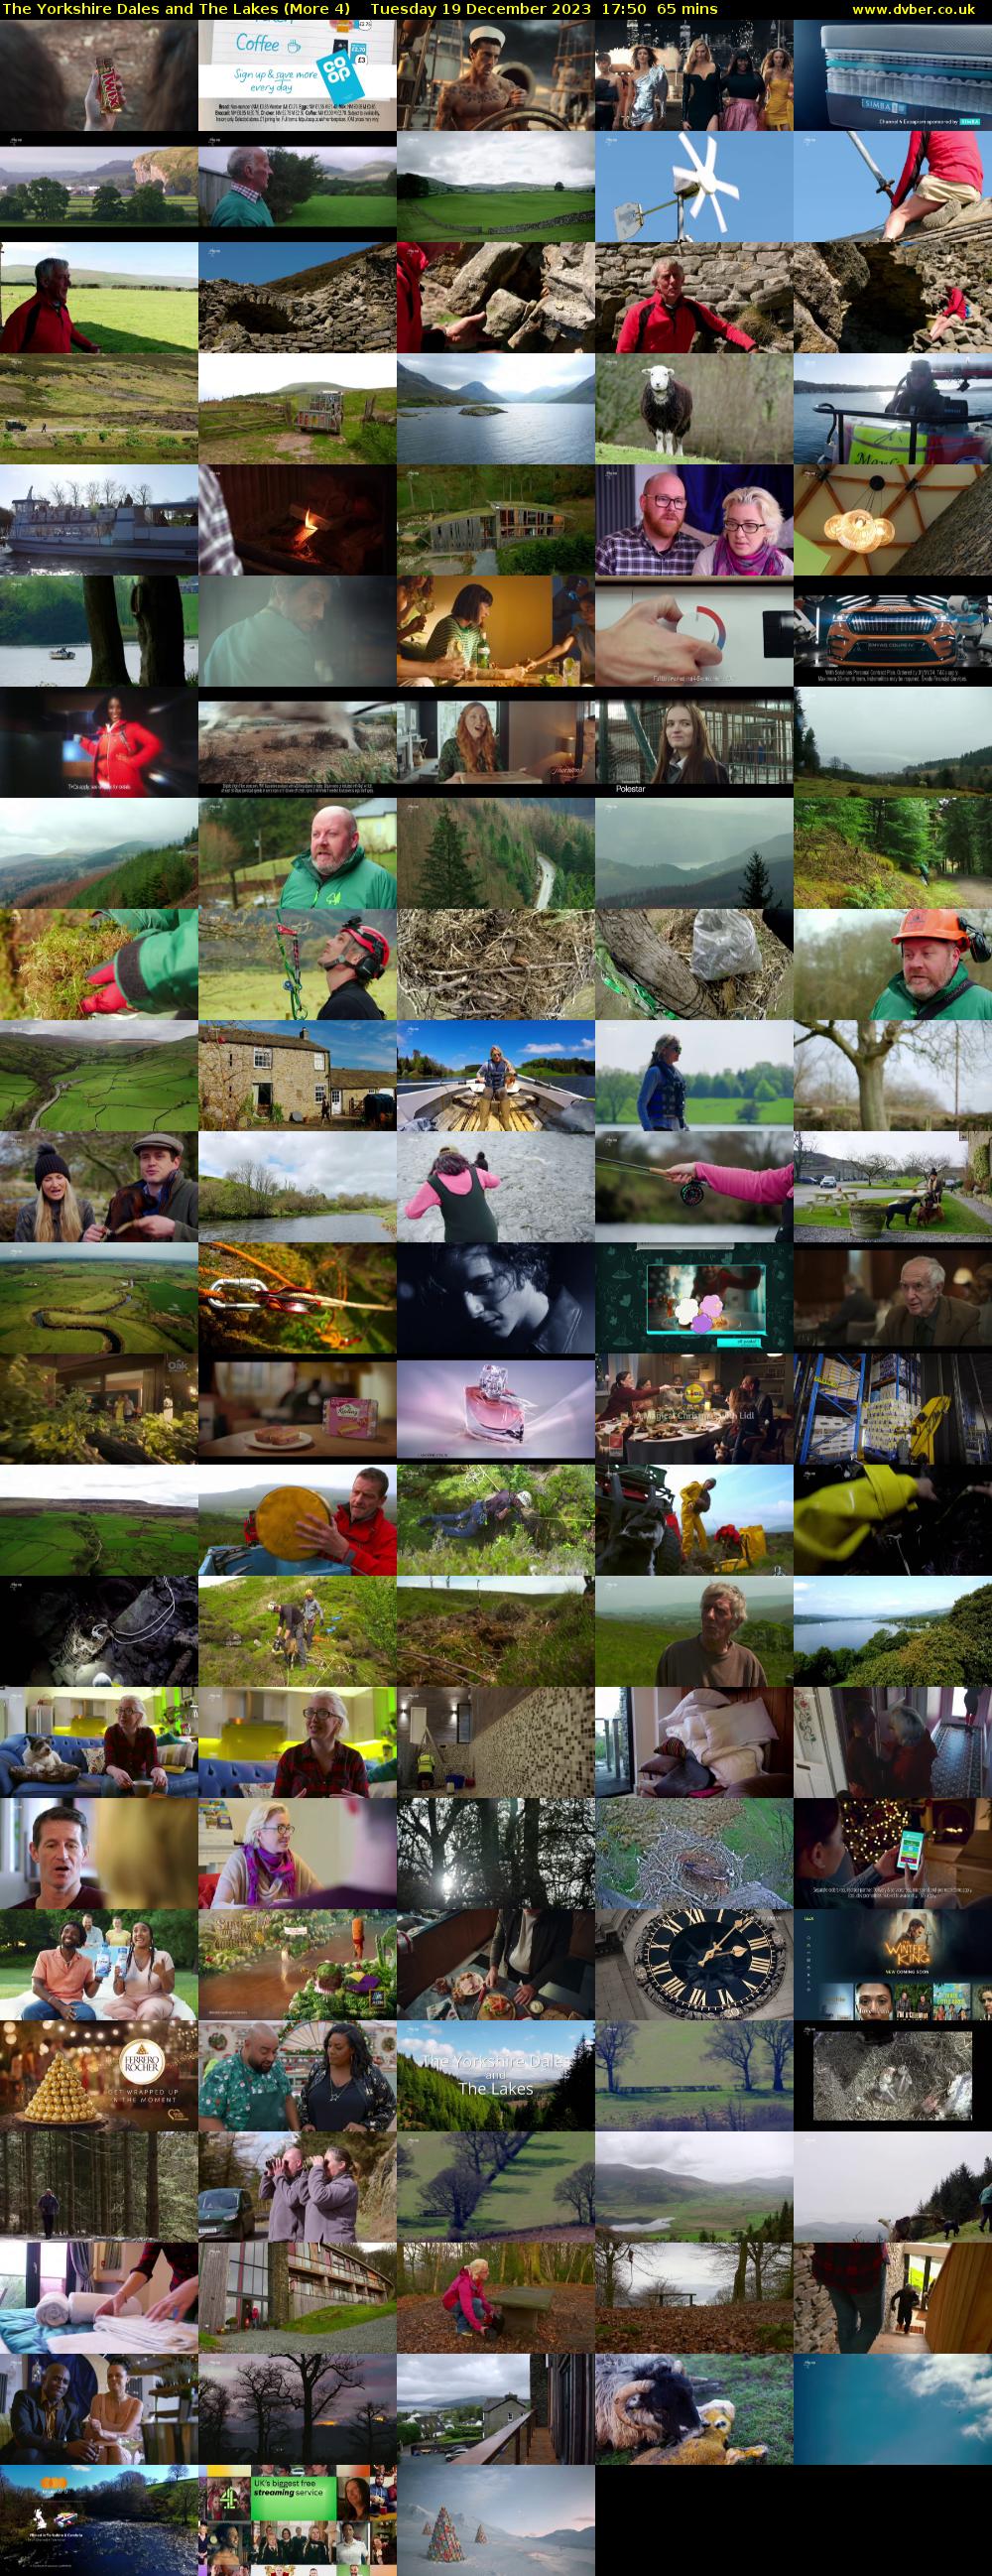 The Yorkshire Dales and The Lakes (More 4) Tuesday 19 December 2023 17:50 - 18:55